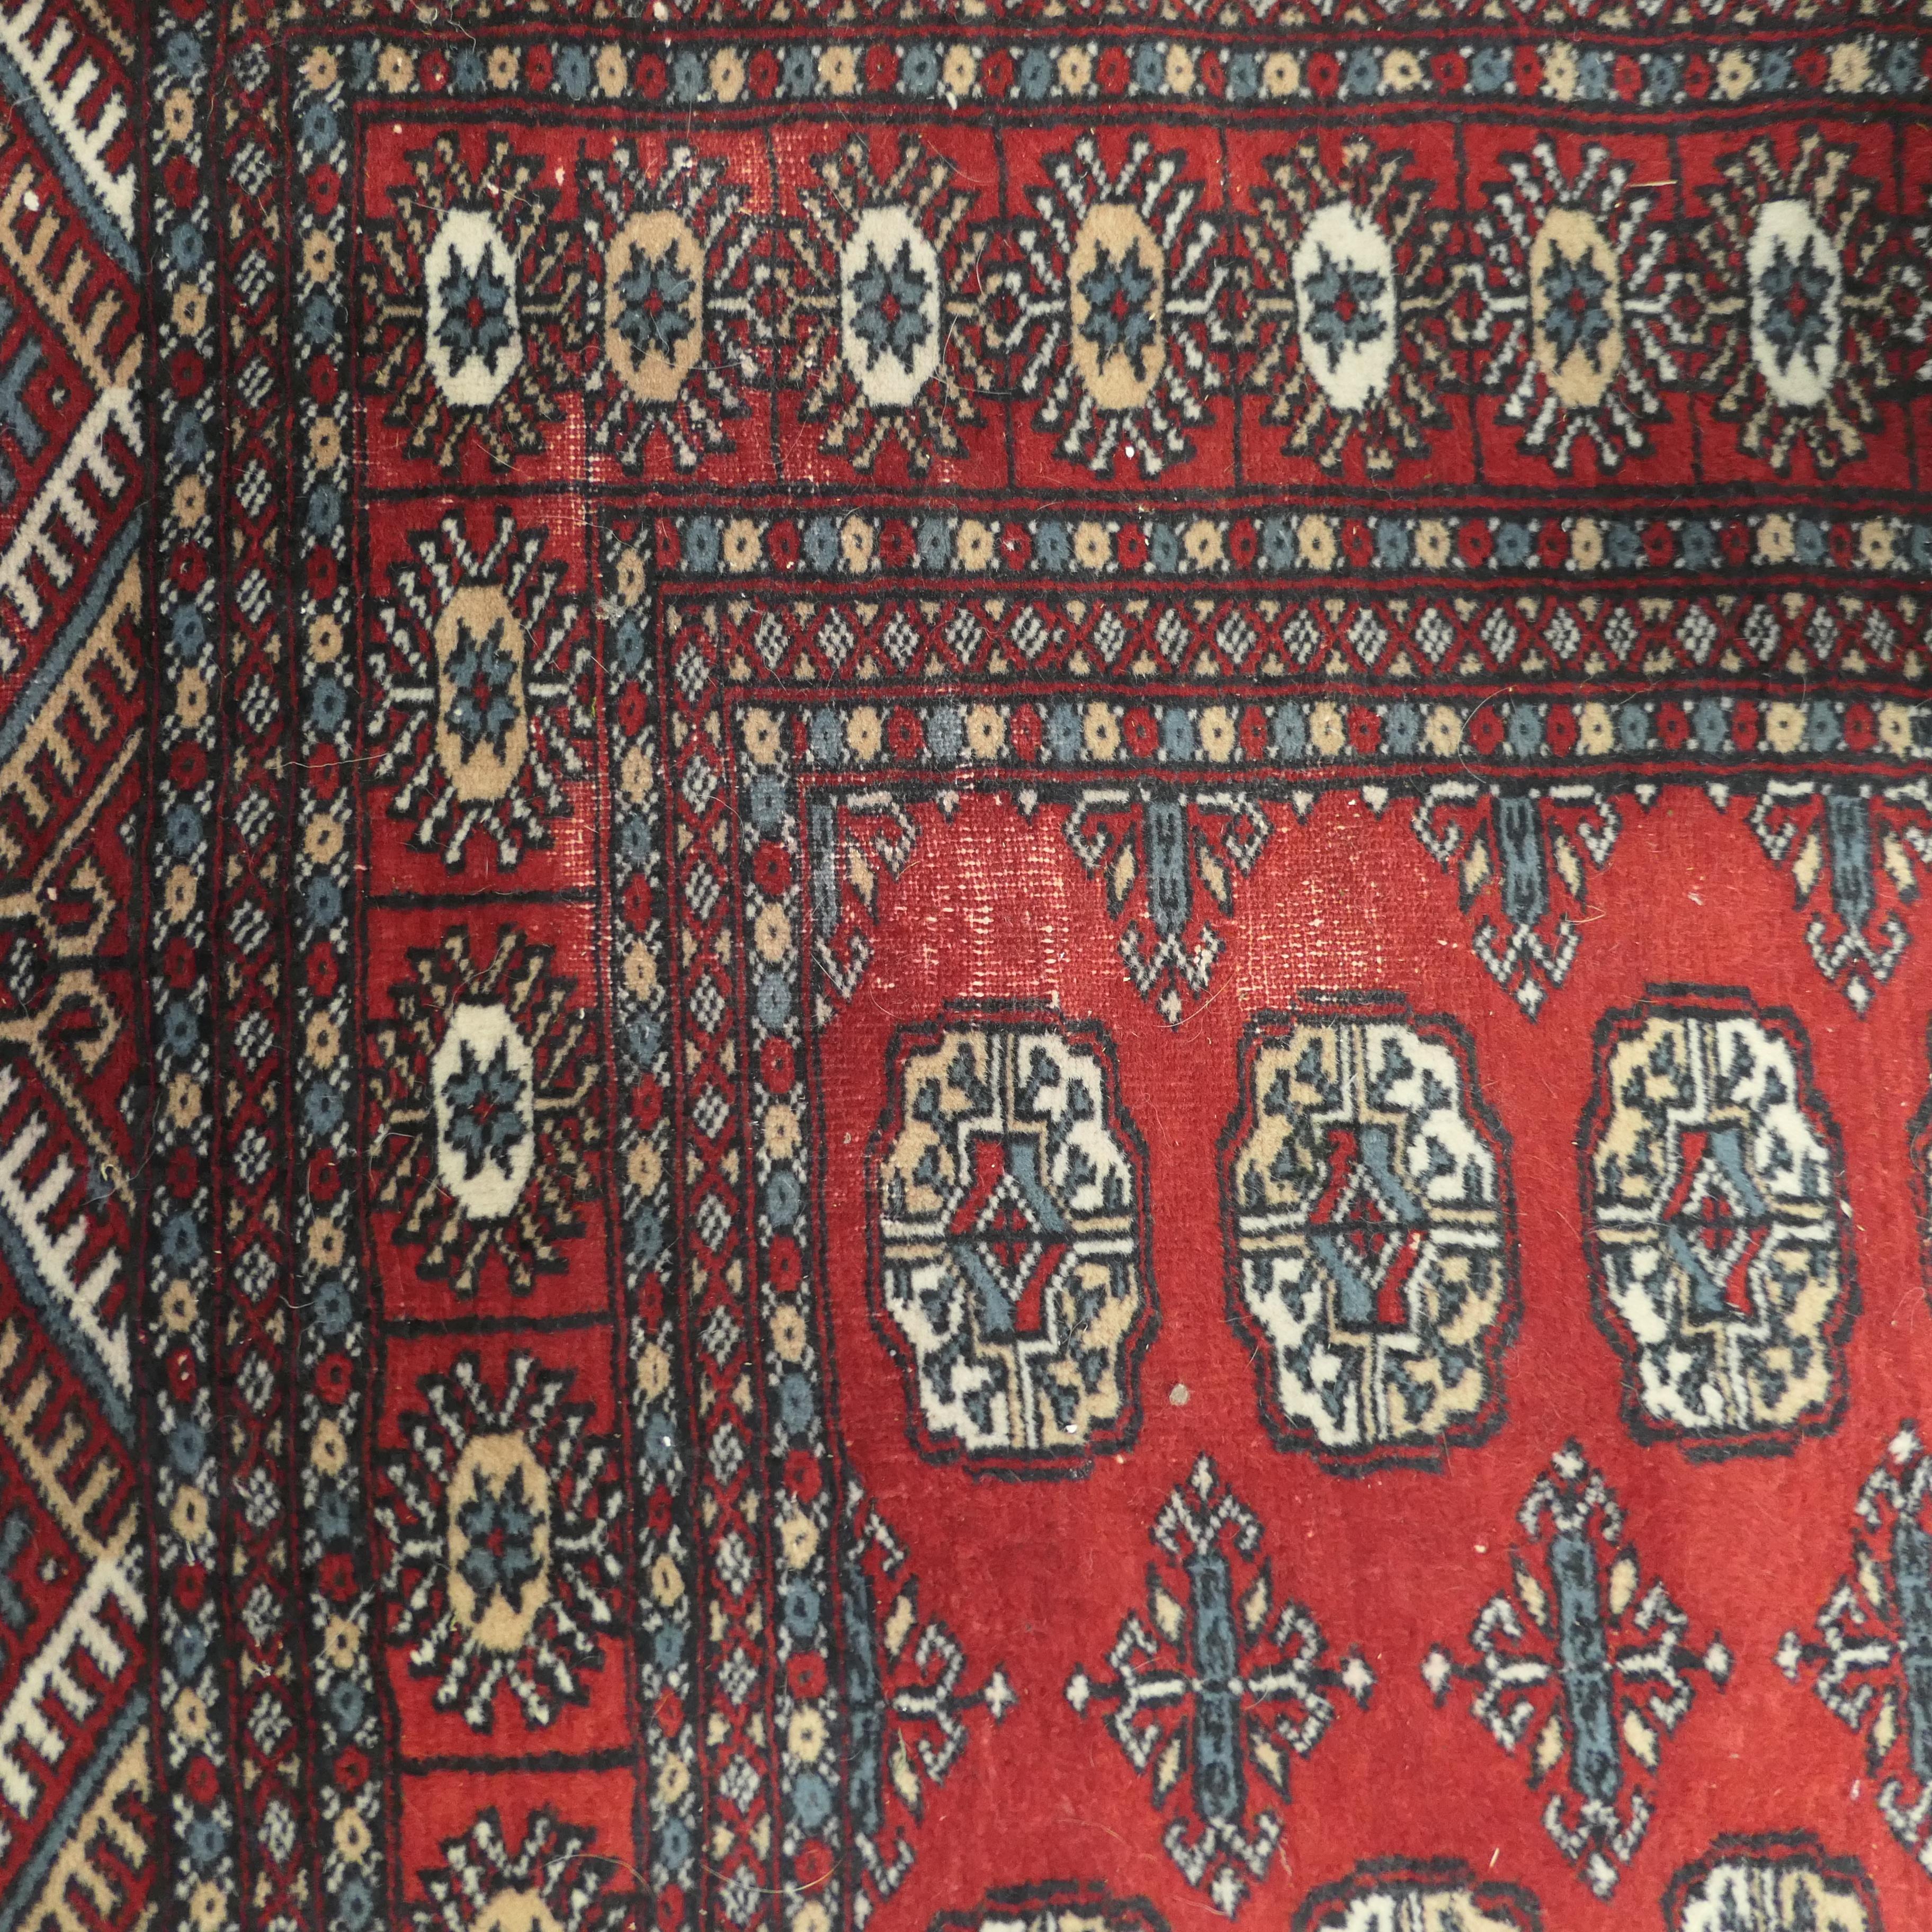 A Lovely Bright Red Wool Rug  The Carpet is a wonderful Bright colour   For Sale 2